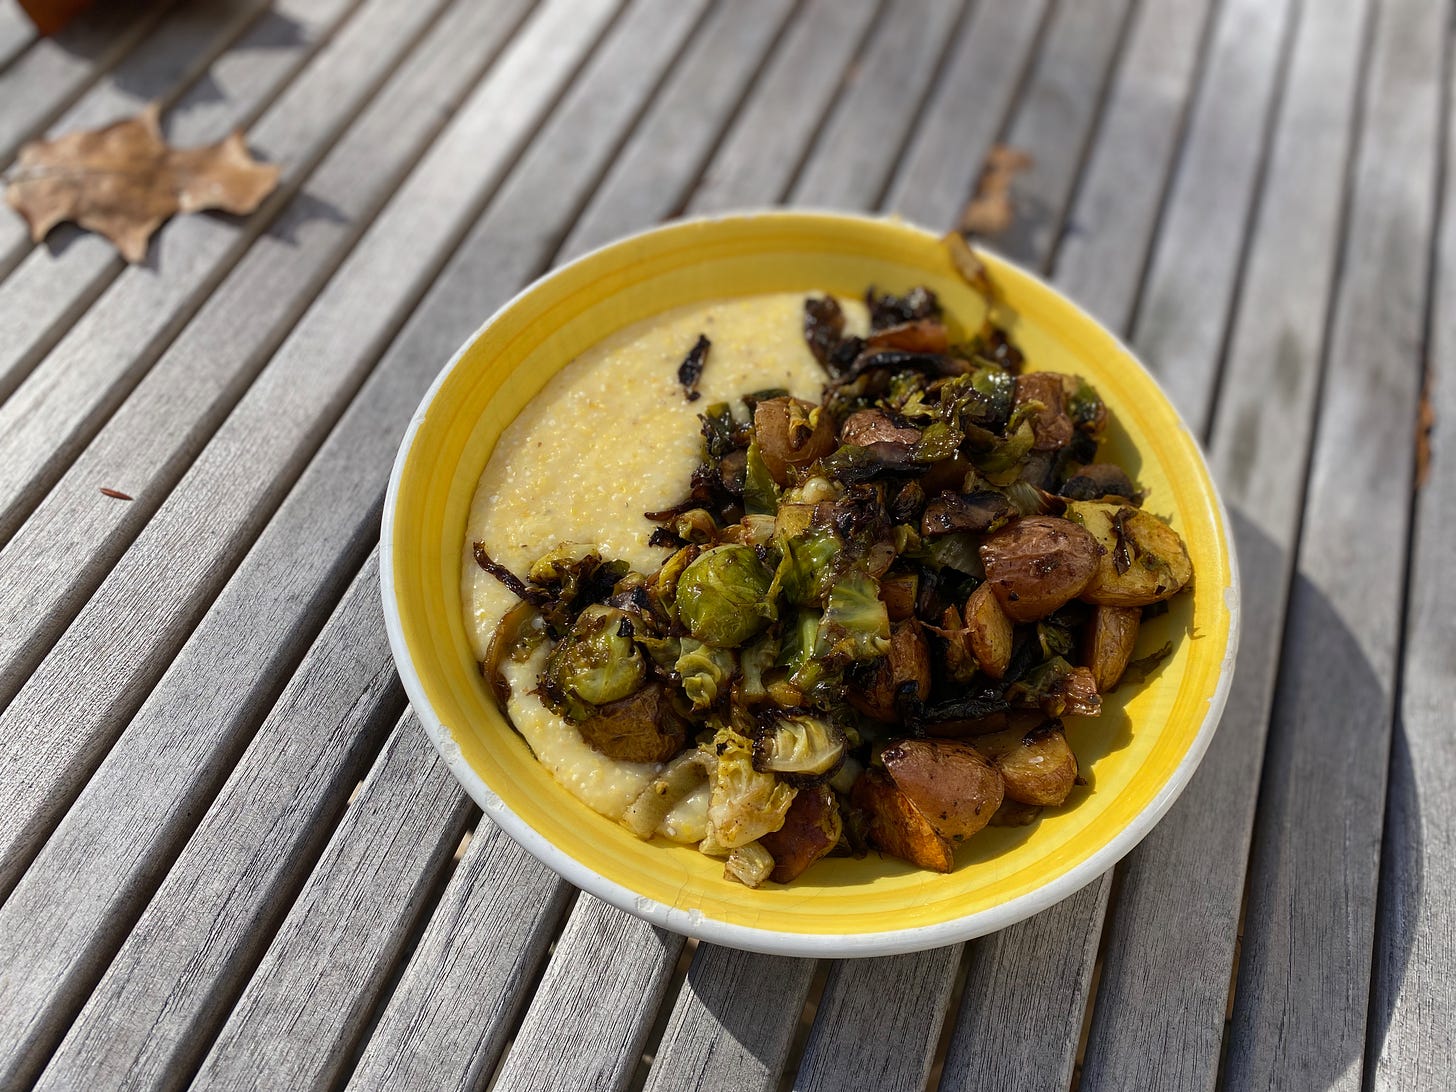 A shallow yellow bowl filled with polenta, Brussels sprouts, and roasted potatoes sits on an outdoor table. 